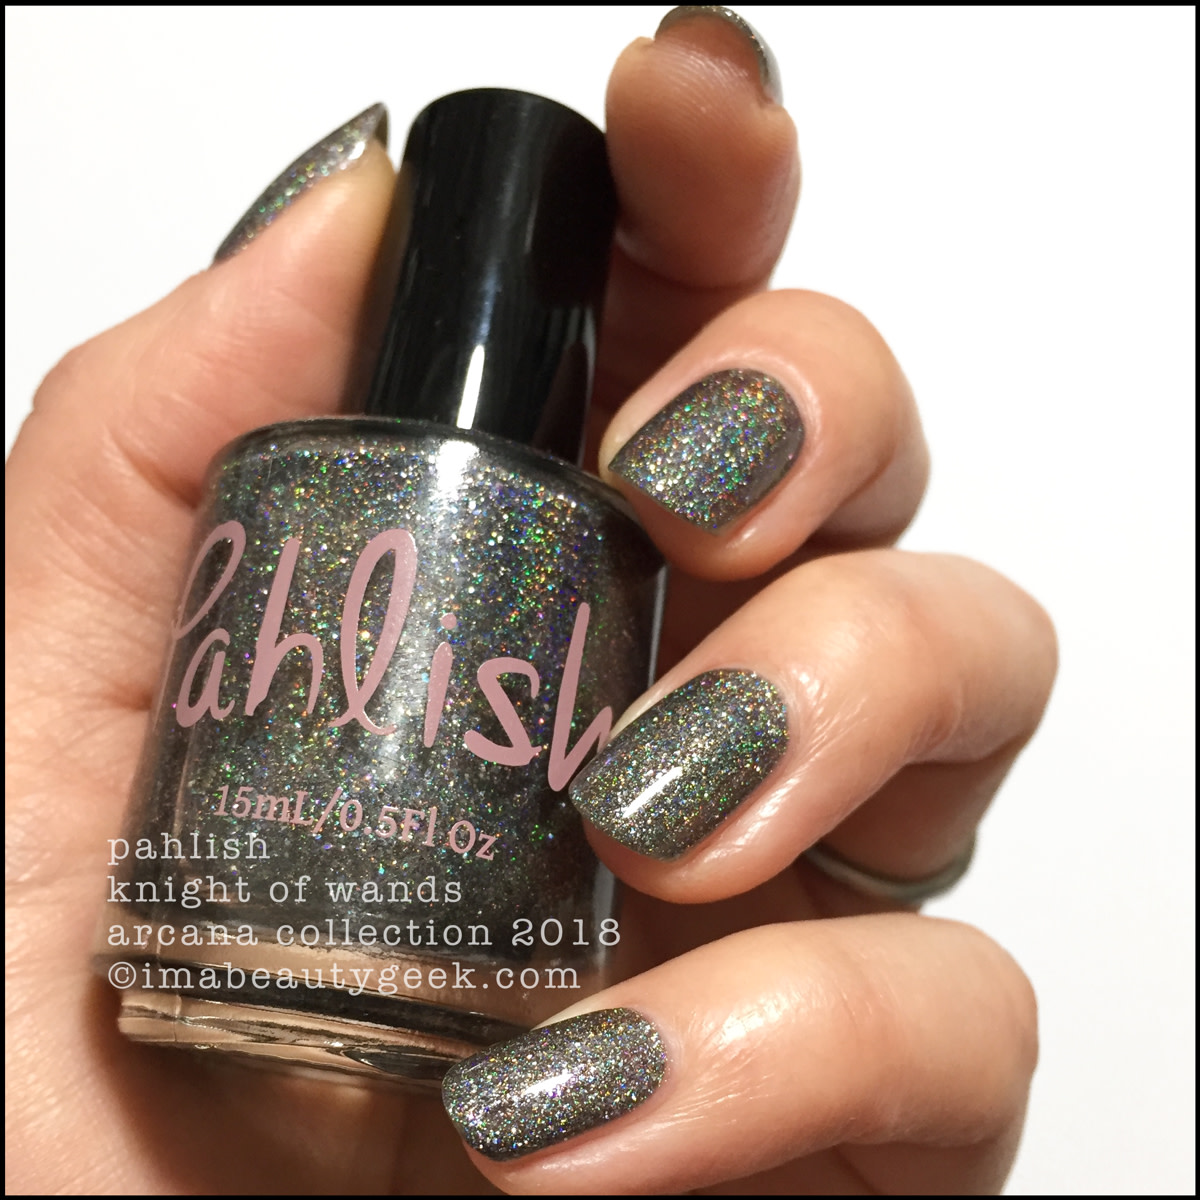 Pahlish Knight of Wands 2 - Pahlish Arcana Collection Swatches Review 2018